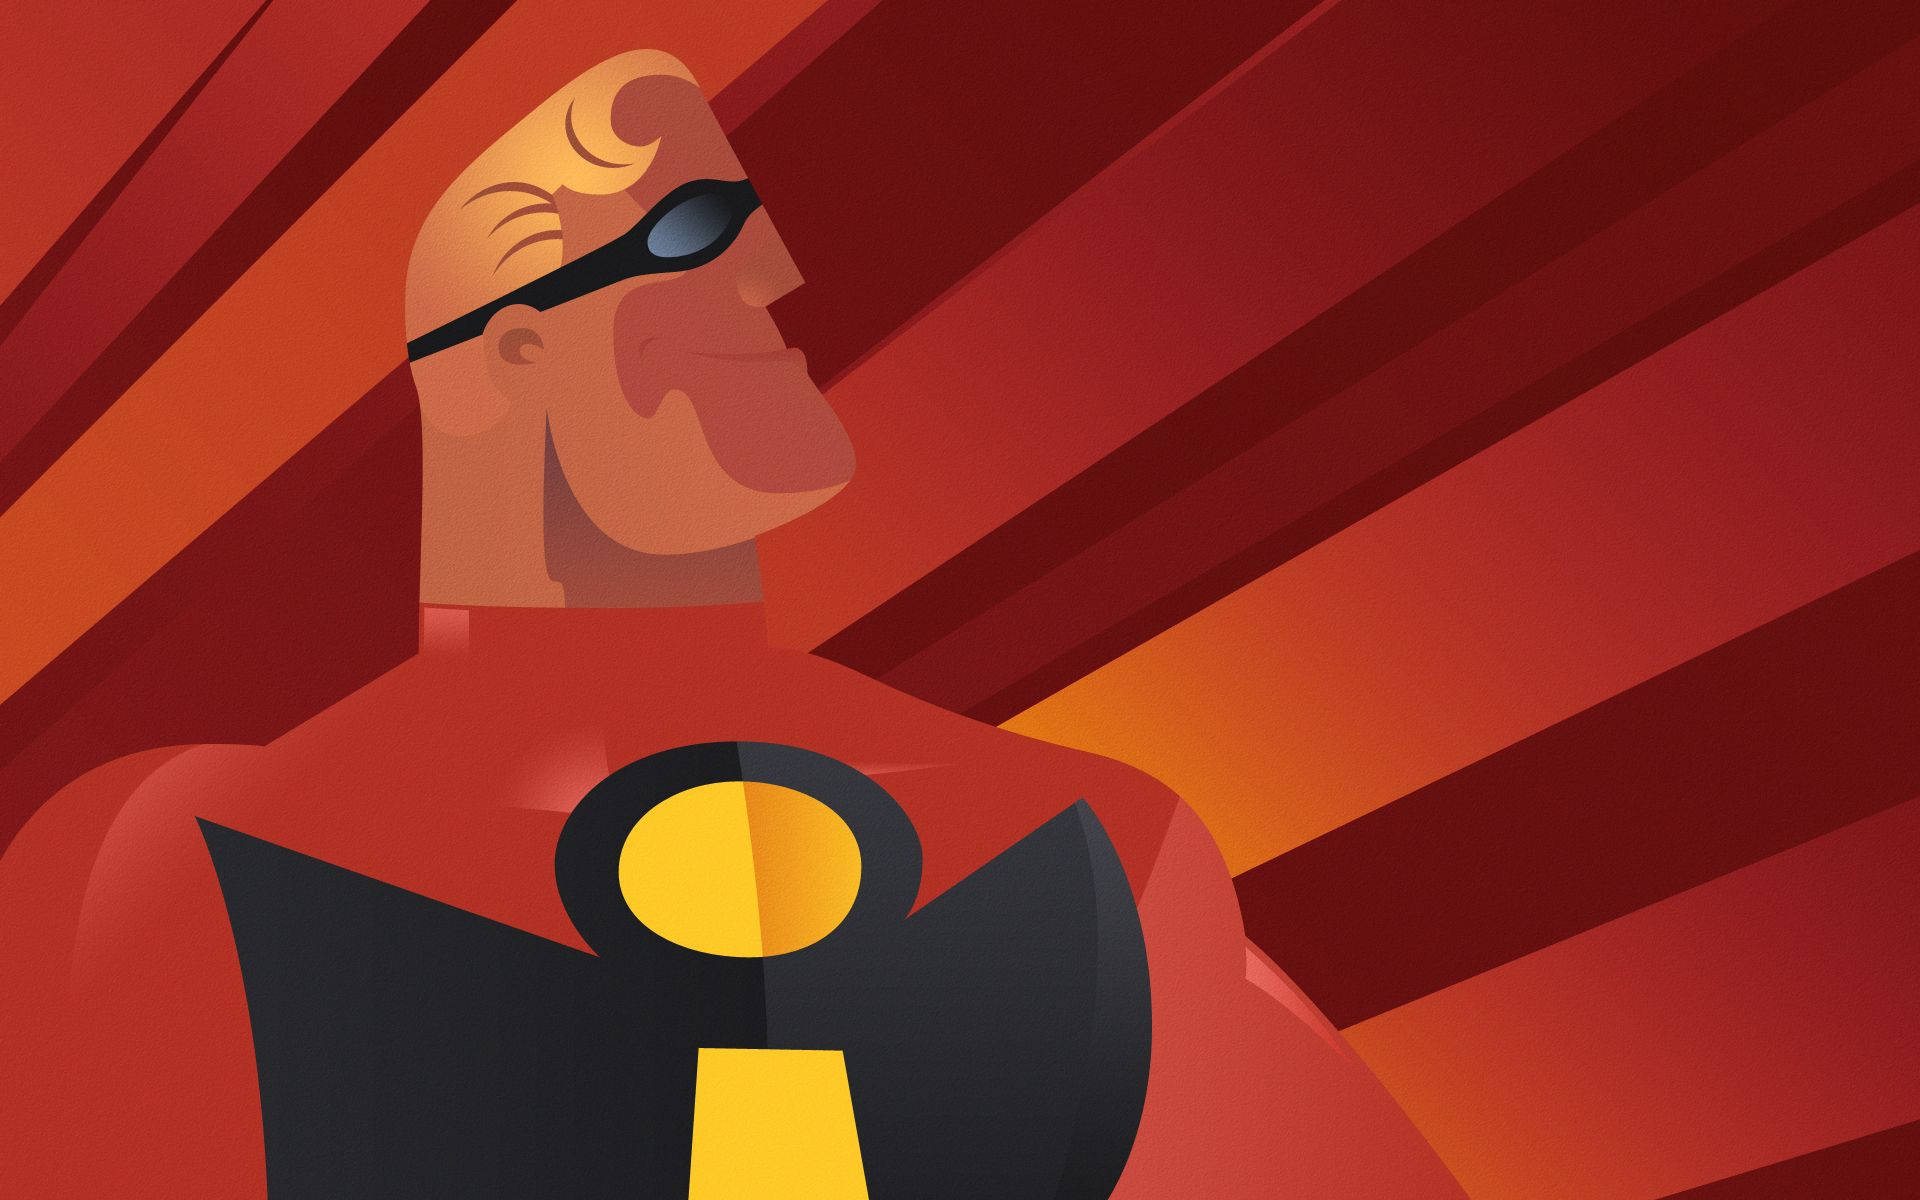 Mr Incredible - A Superhero with Unstoppable Strength Wallpaper